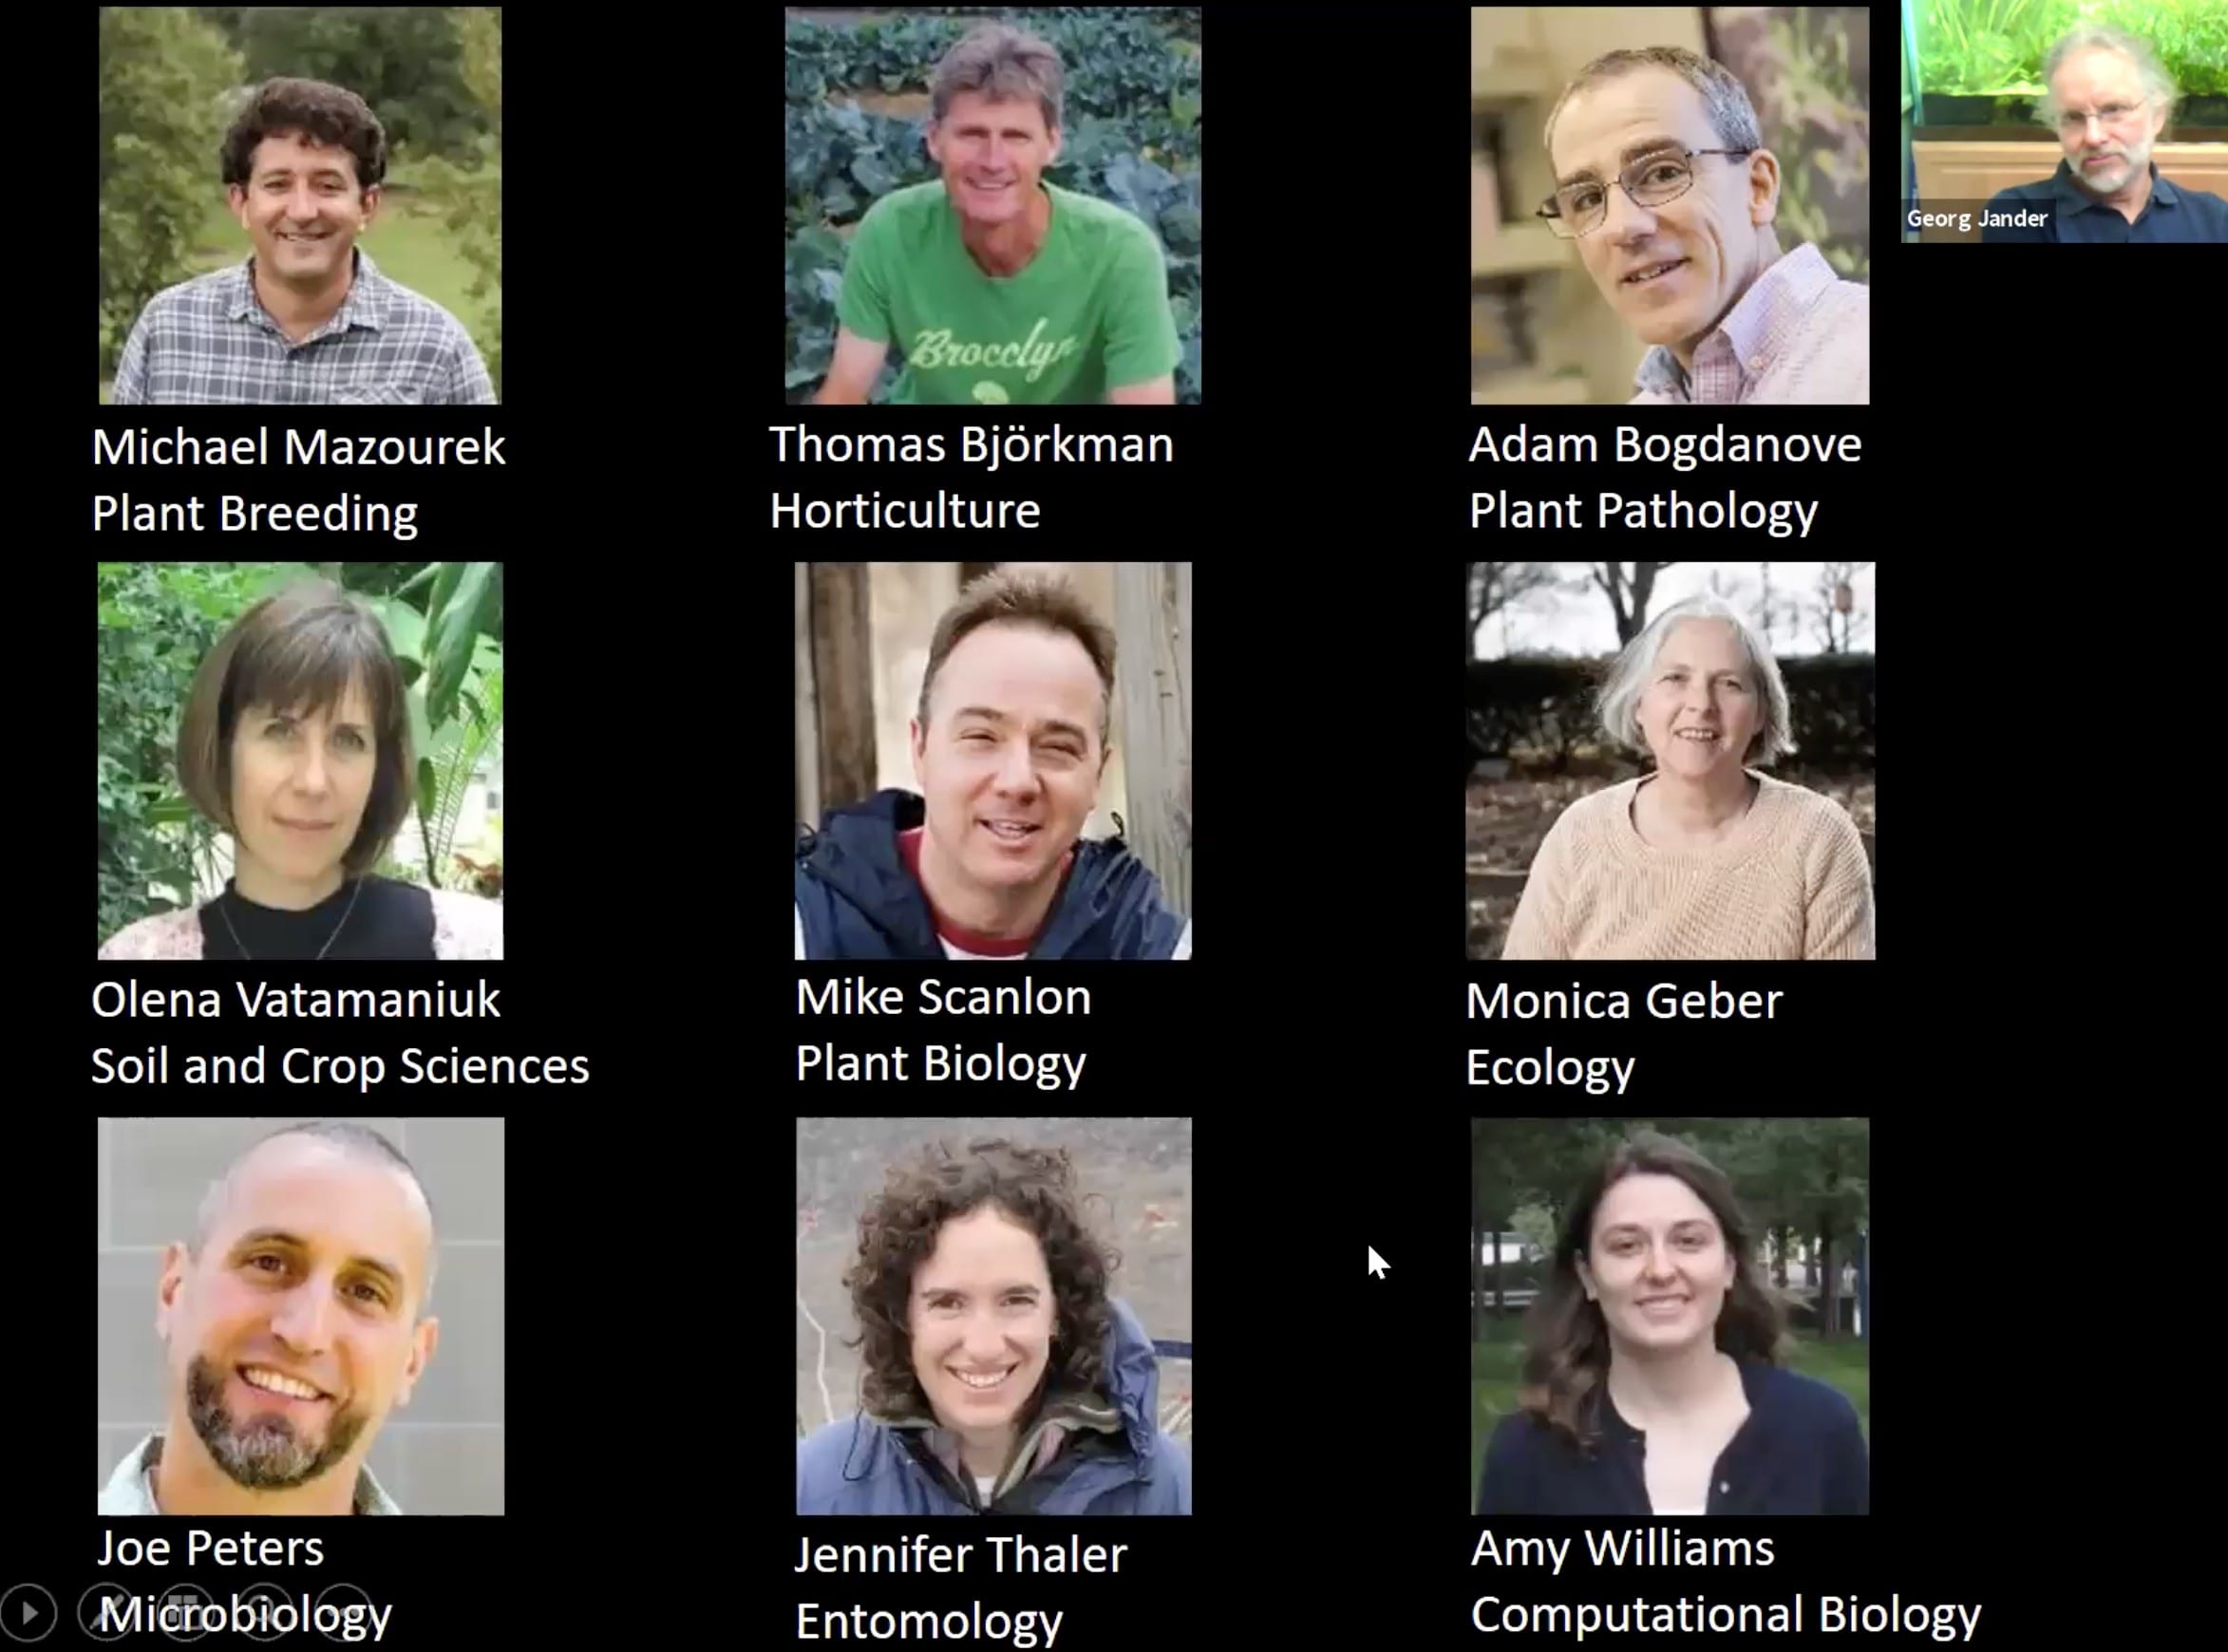 A screenshot of a Zoom seminar with representatives from nine departments in Cornell University's School of Integrate Plant Science.